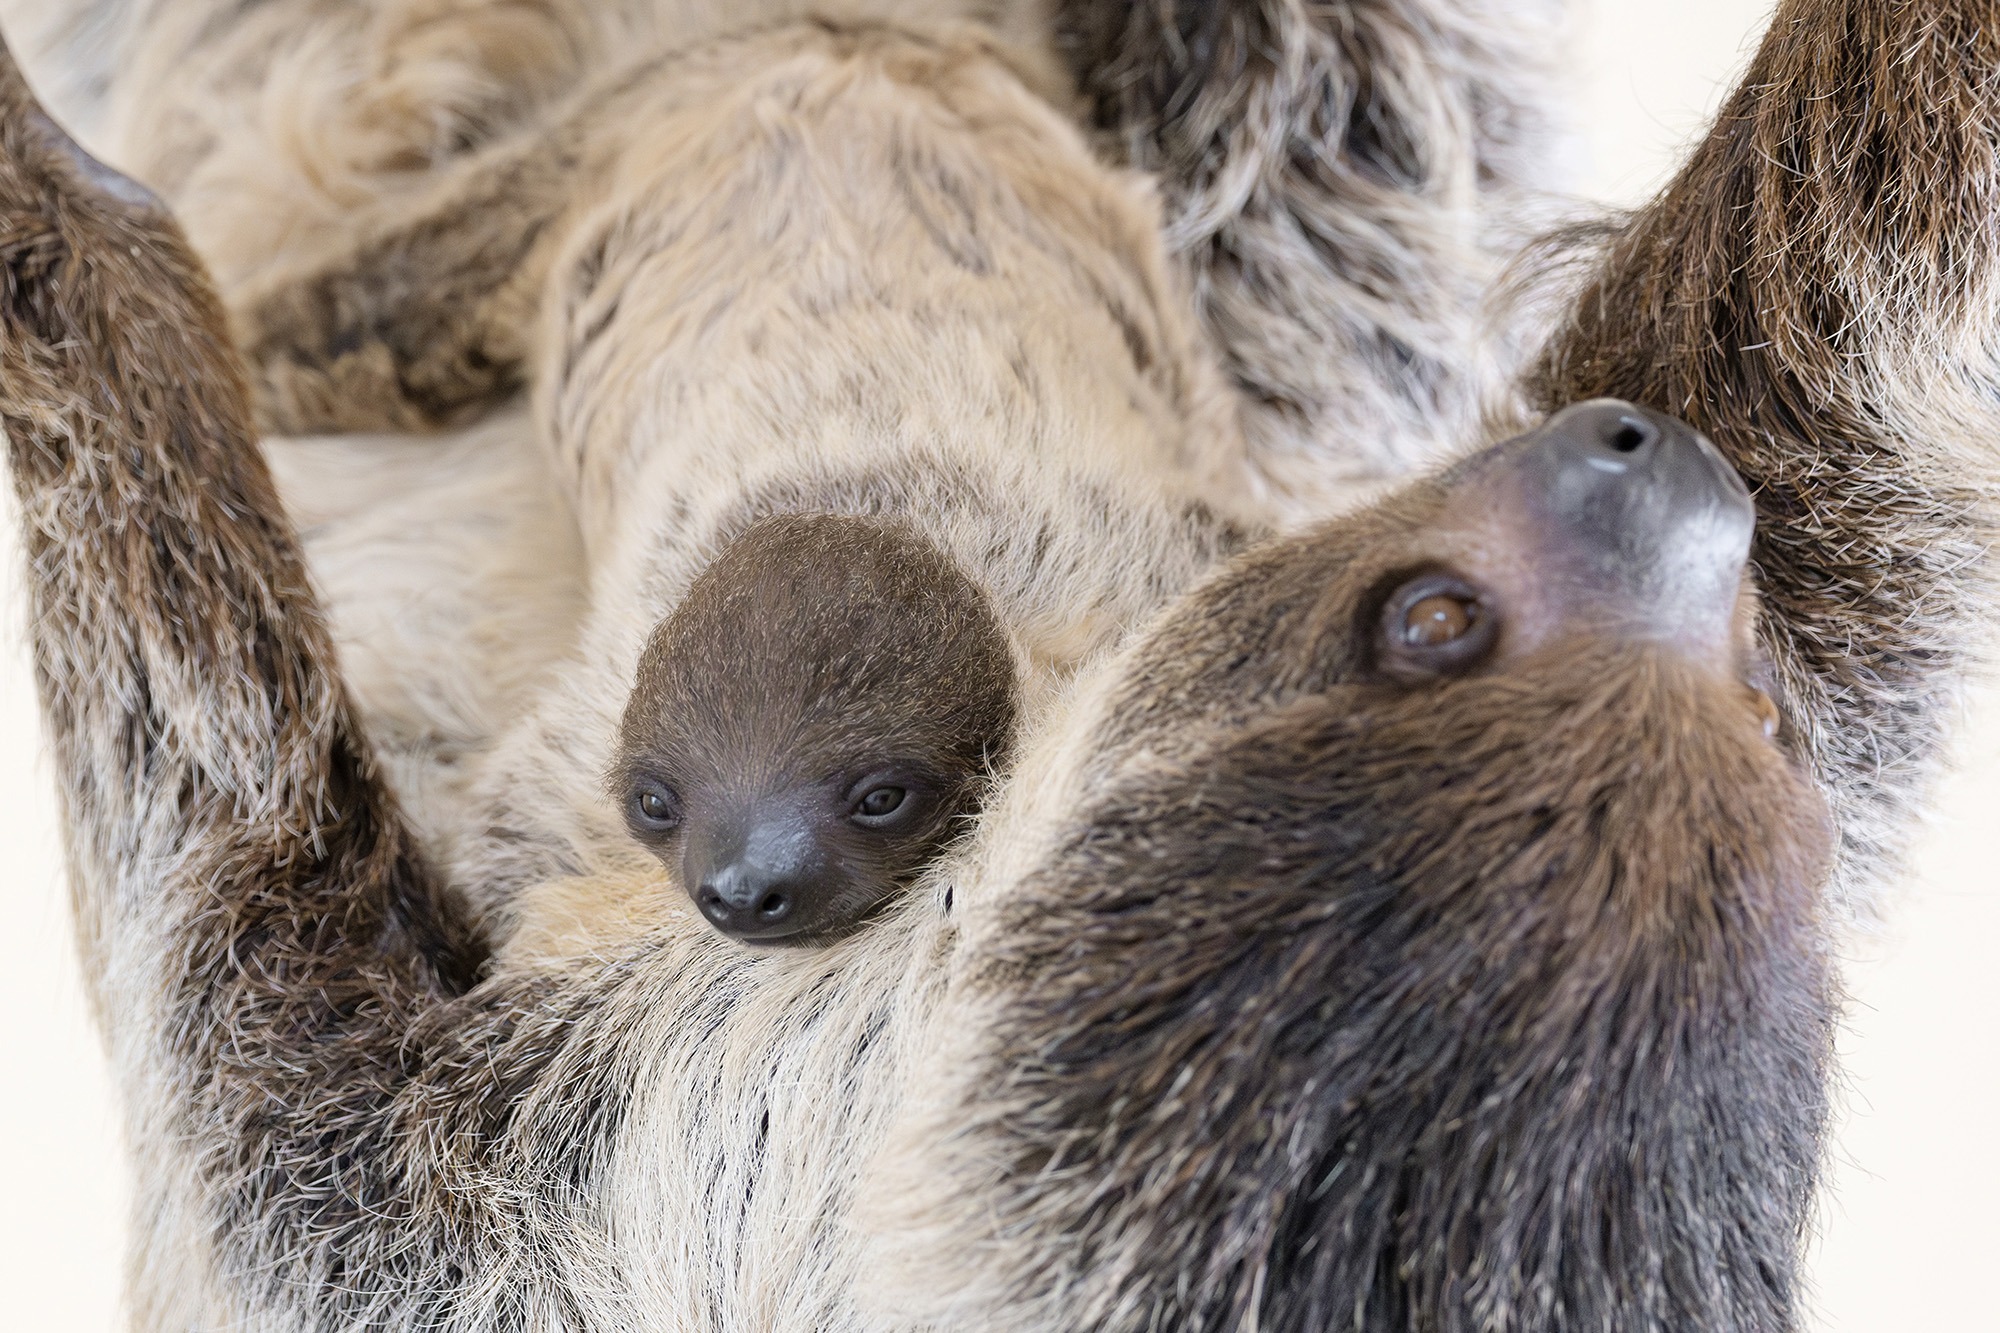 World’s Oldest Zoo Welcomes World’s Slowest Baby